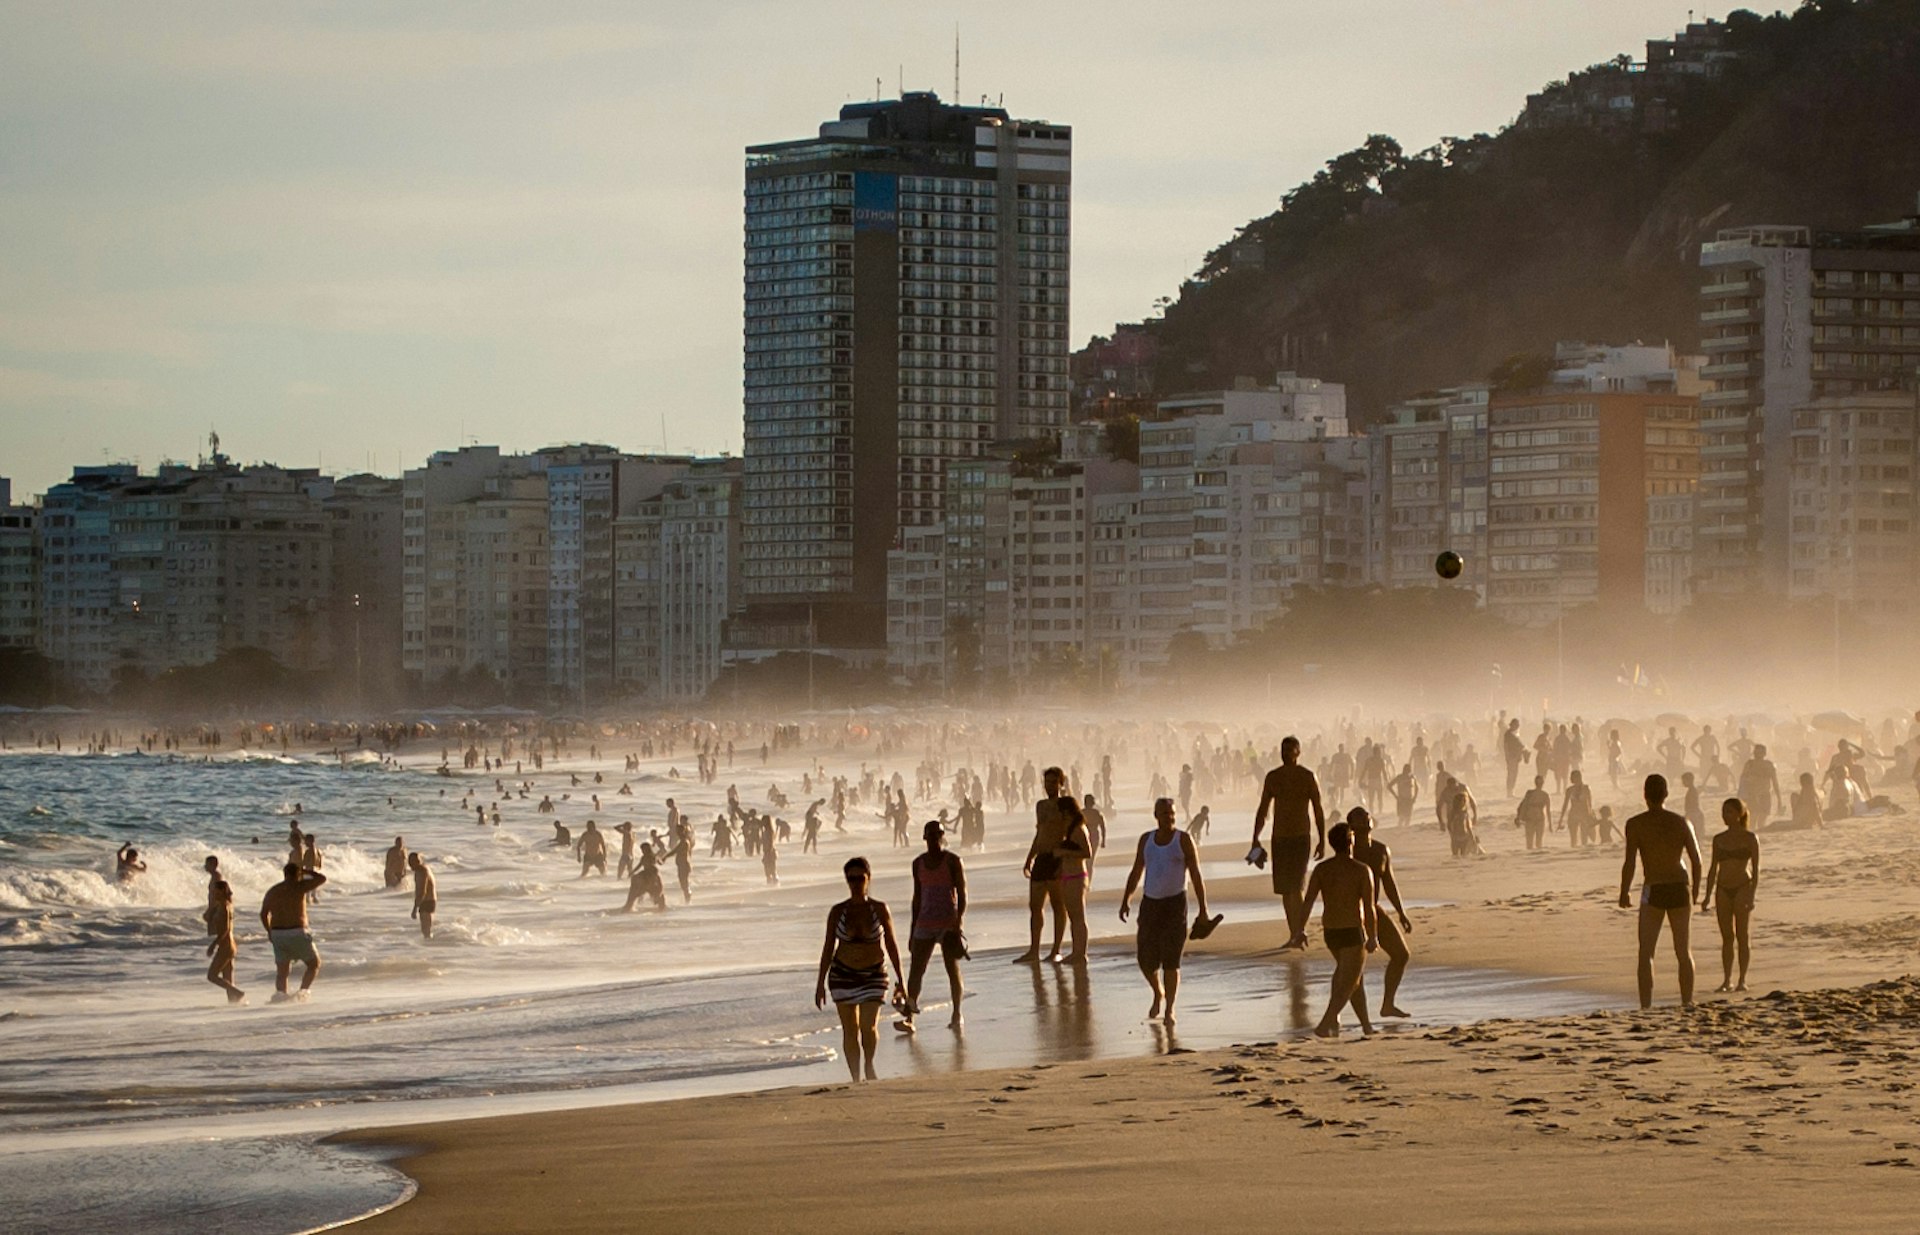 People walk on the beach at Copacabana in Rio at golden hour © Tom Le Mesurier / Lonely Planet